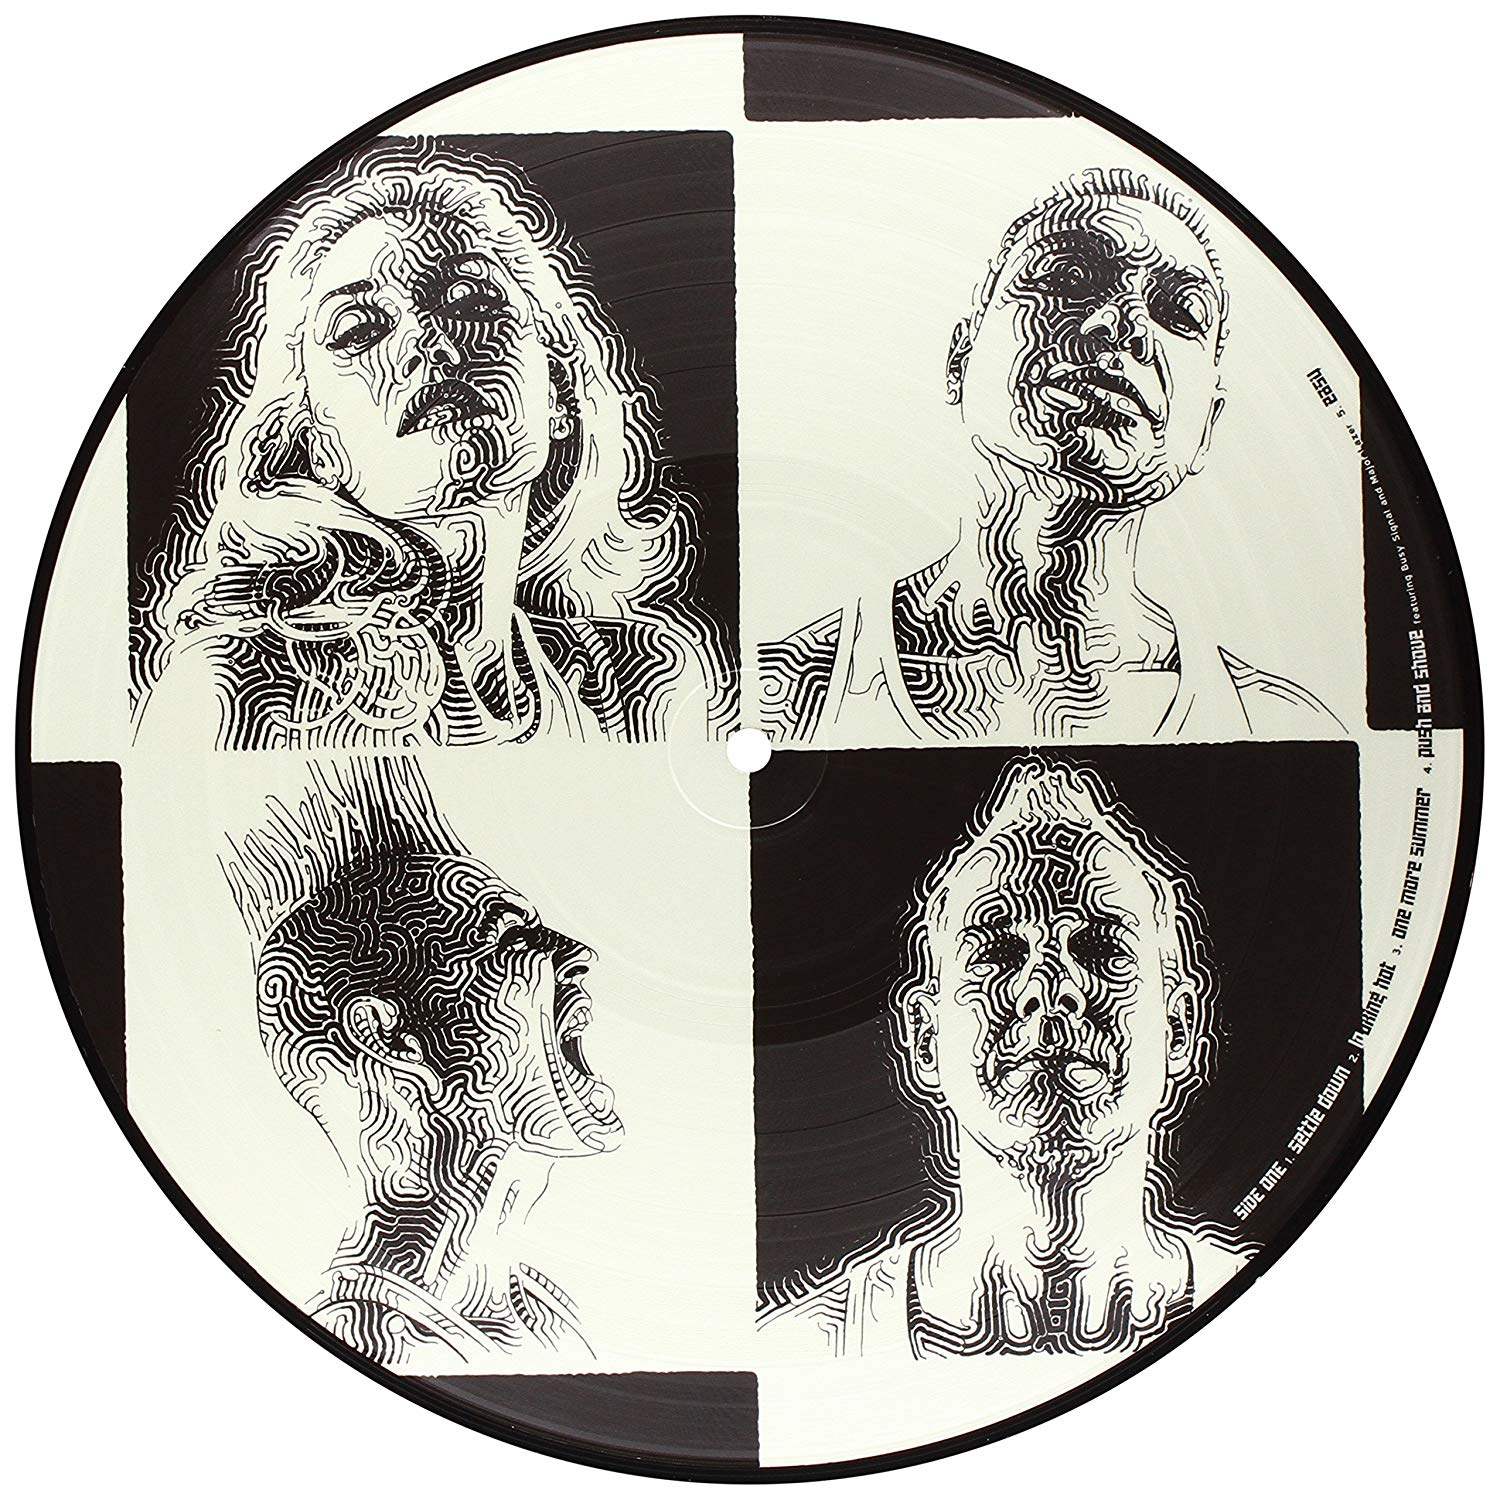 PUSH AND SHOVE (PICTURE DISC)